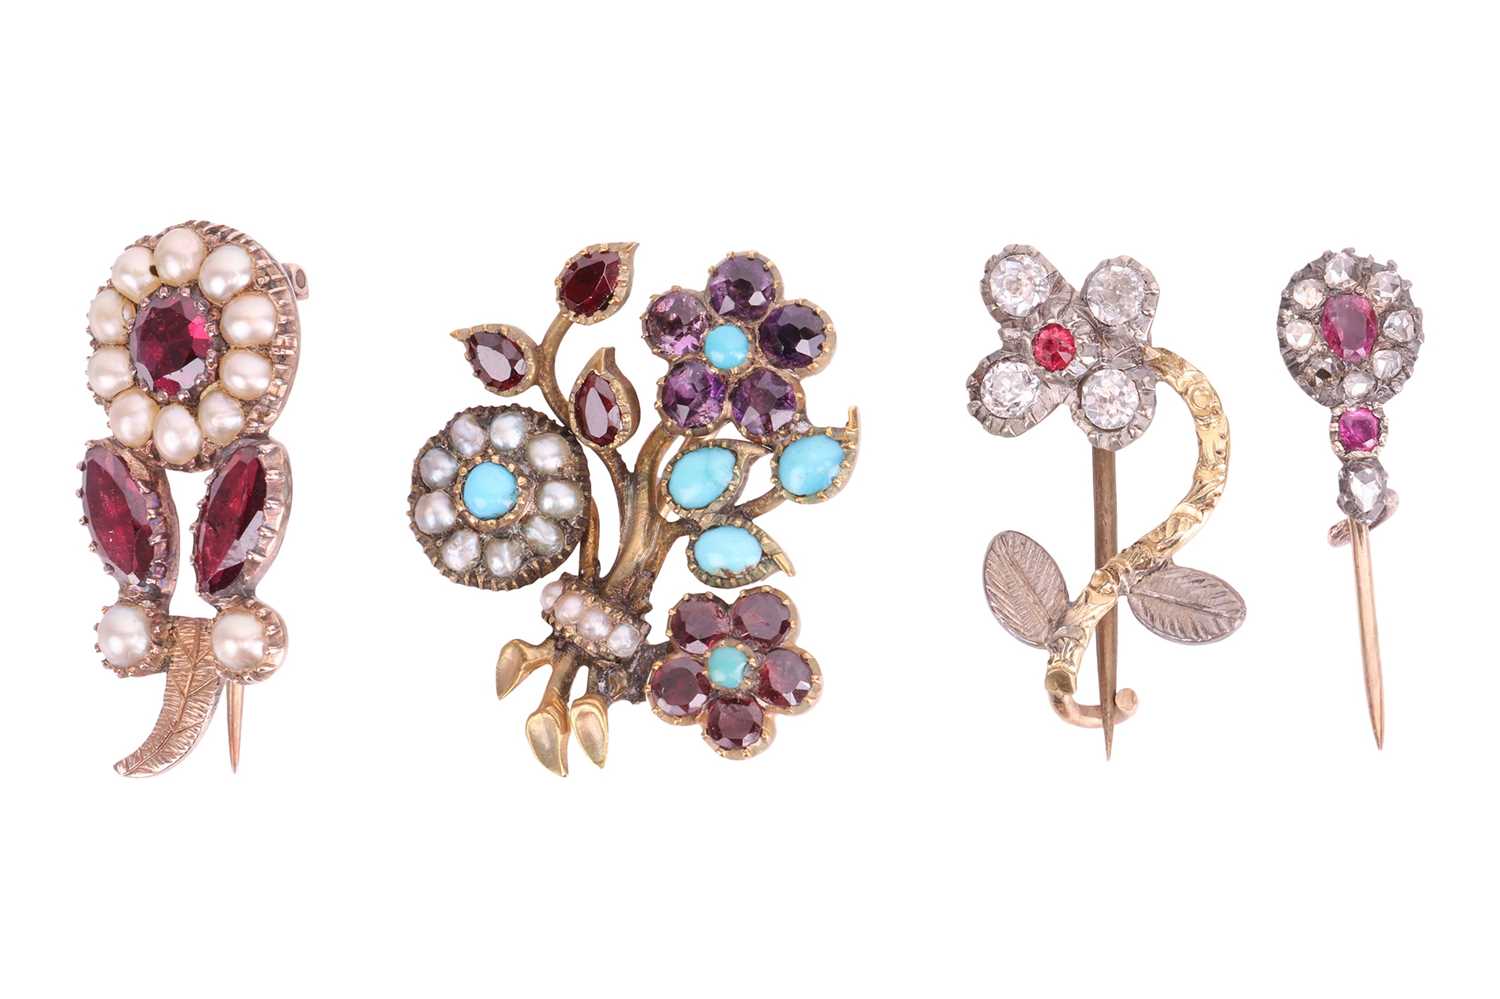 A collection of four early 19th century gem-set brooches; comprising a floral spray brooch set with 